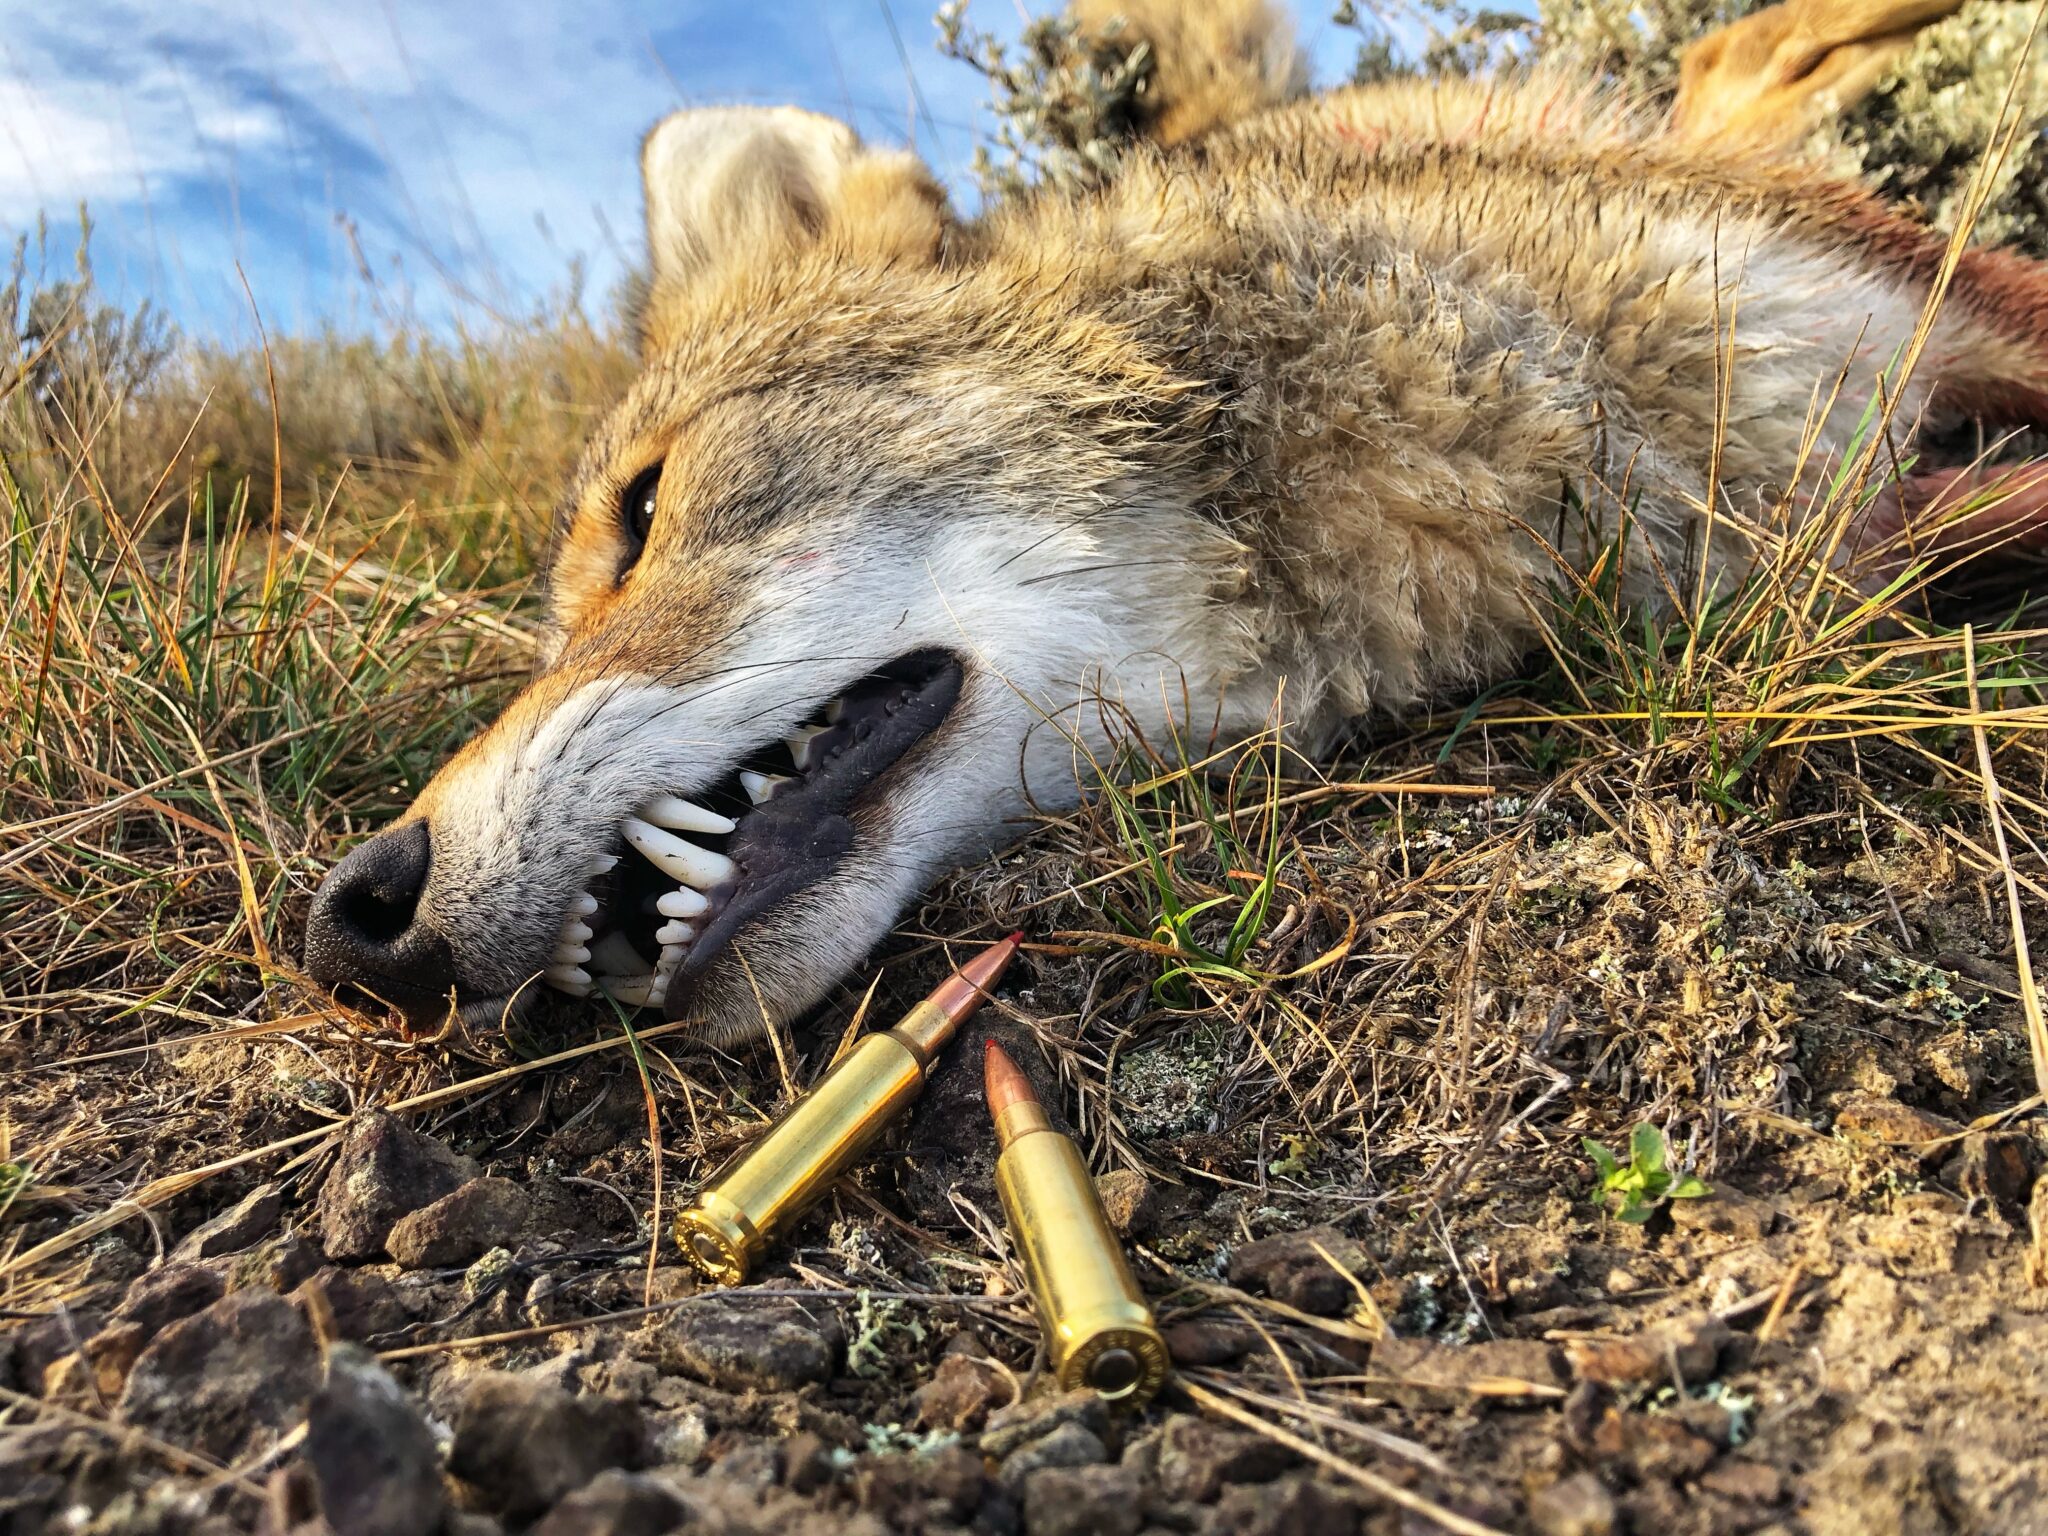 HORNADY’S NEW ELD-VT, A COYOTE CATCHER